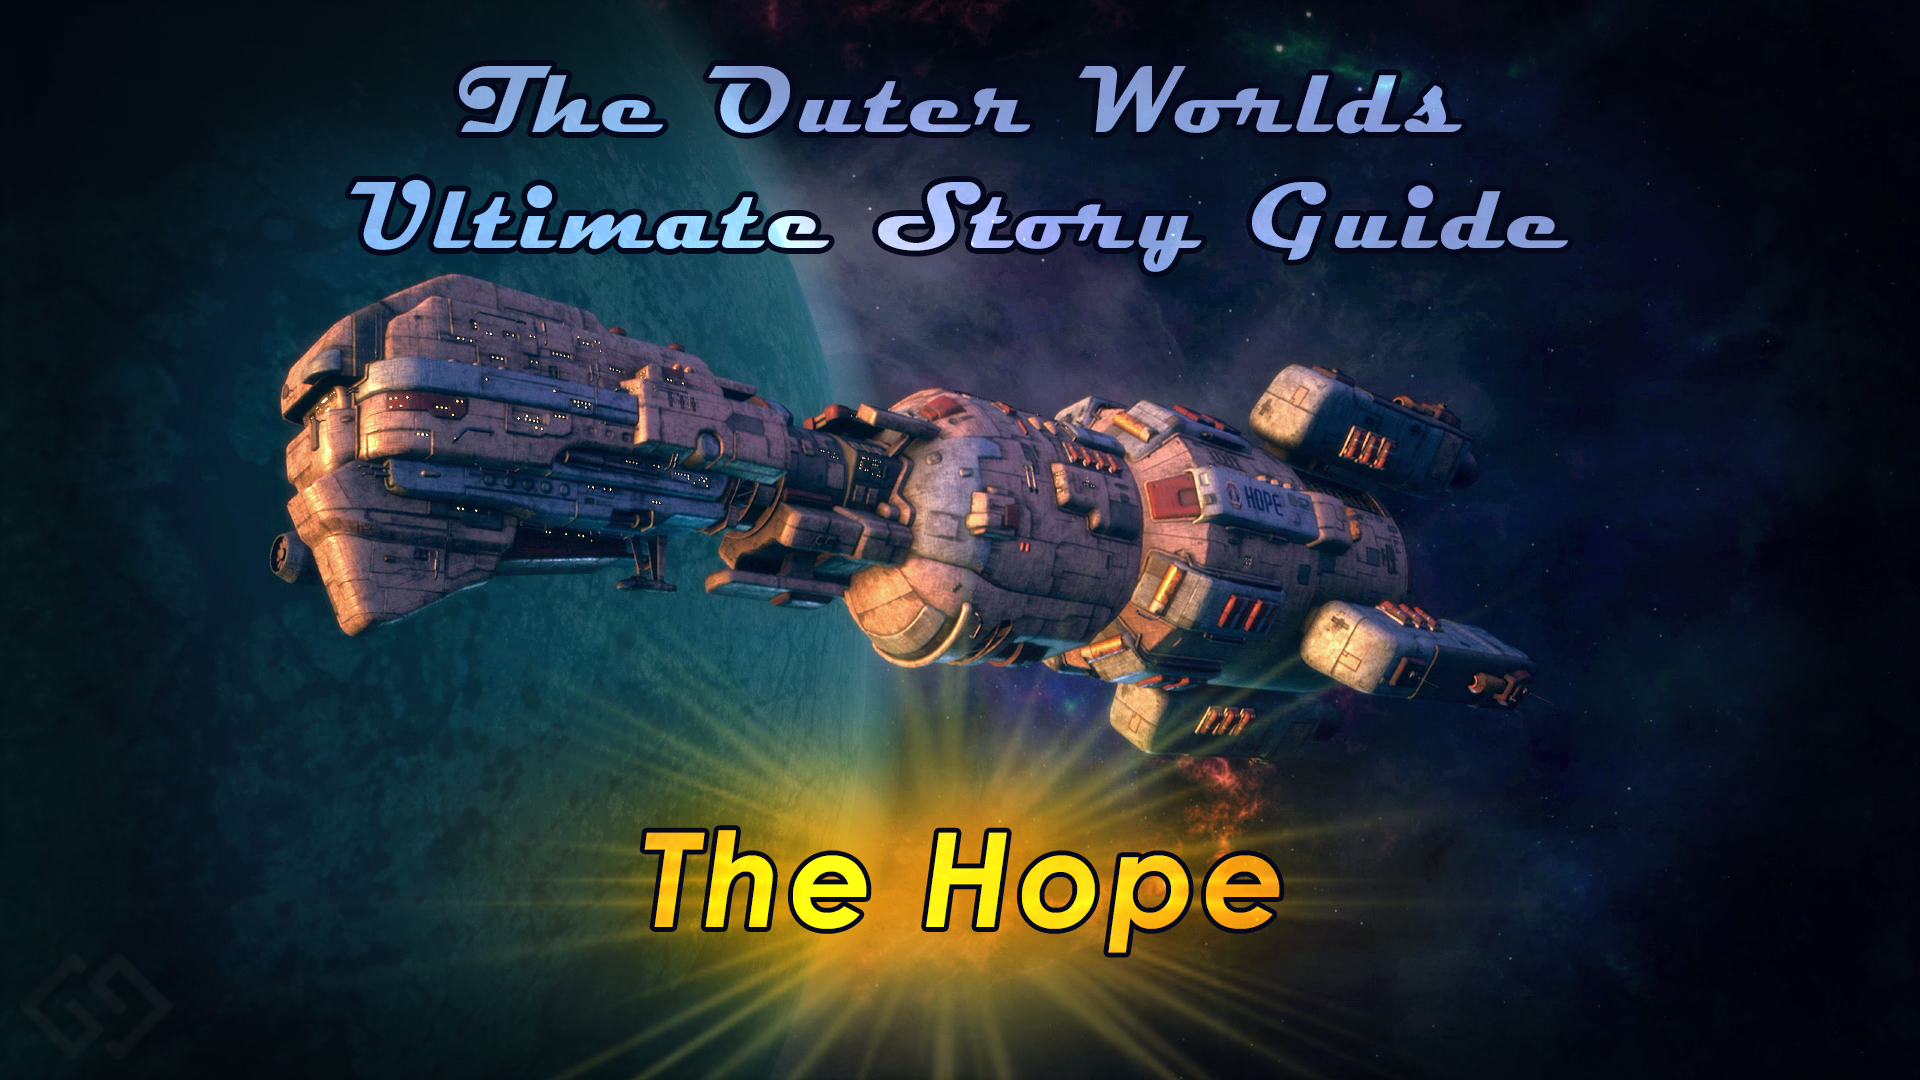 Outer Worlds Story Guide The Hope